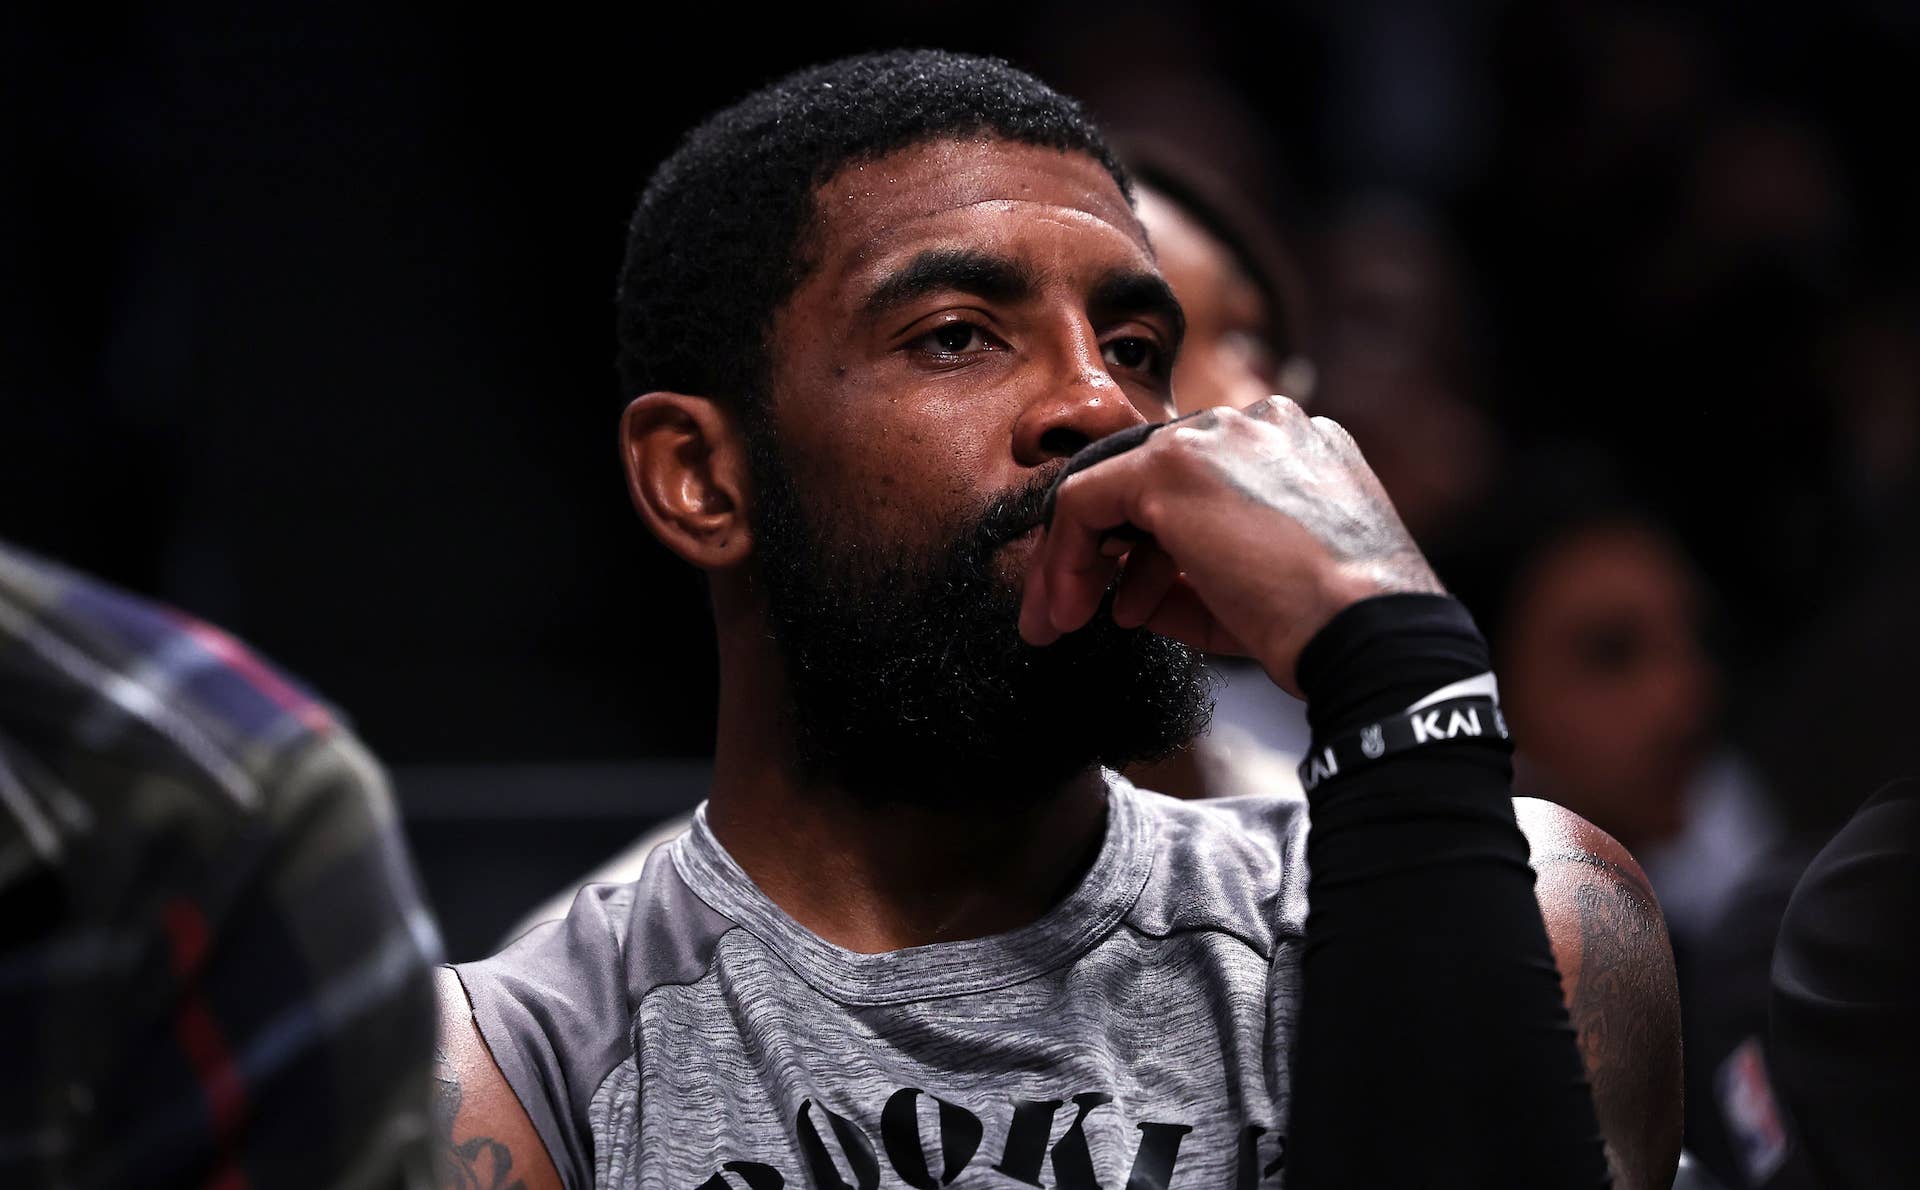 Kyrie Irving has been suspended